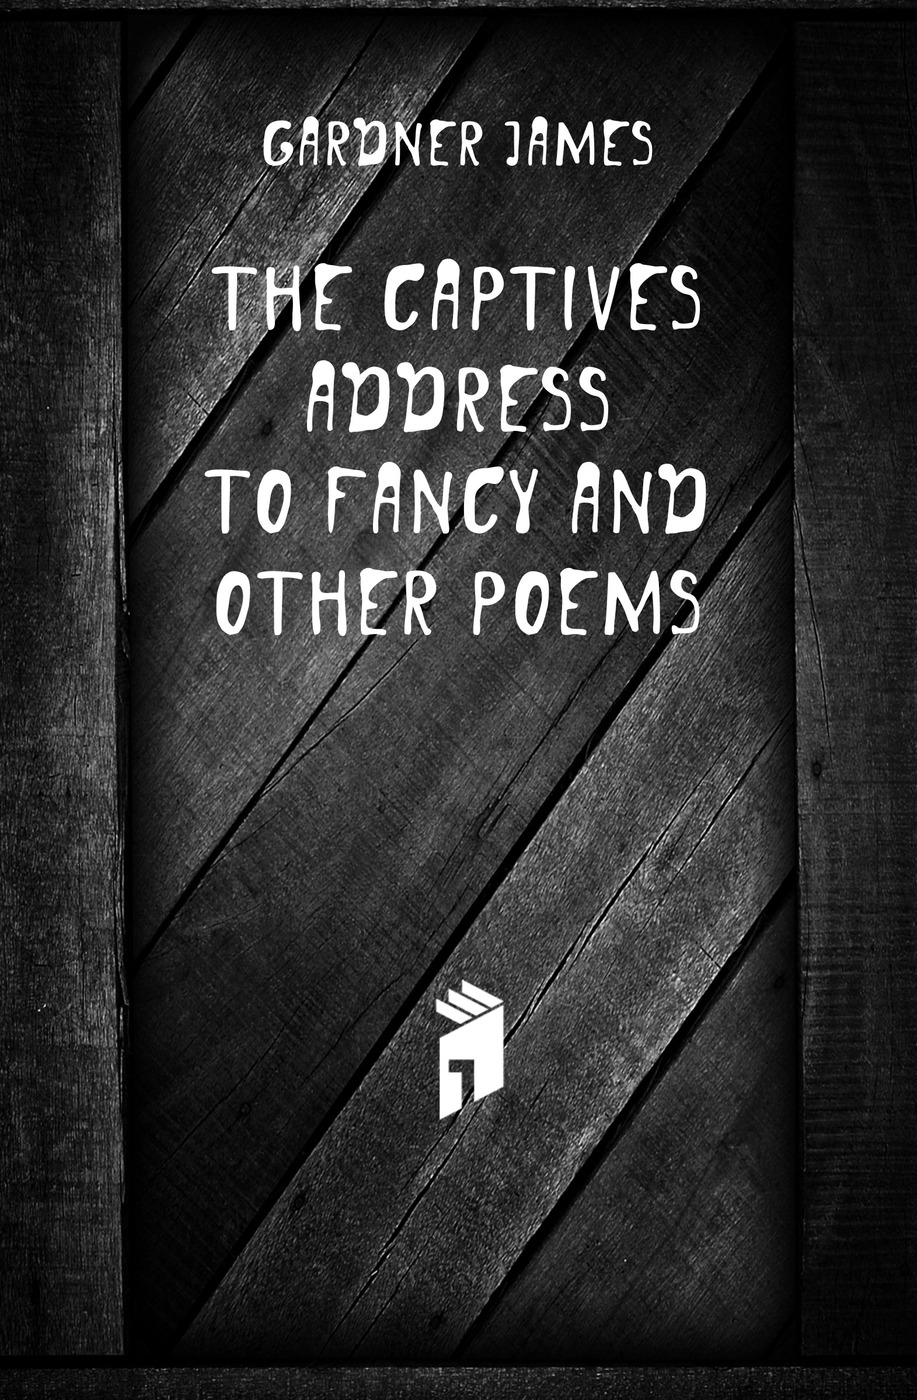 The captives address to fancy and other poems